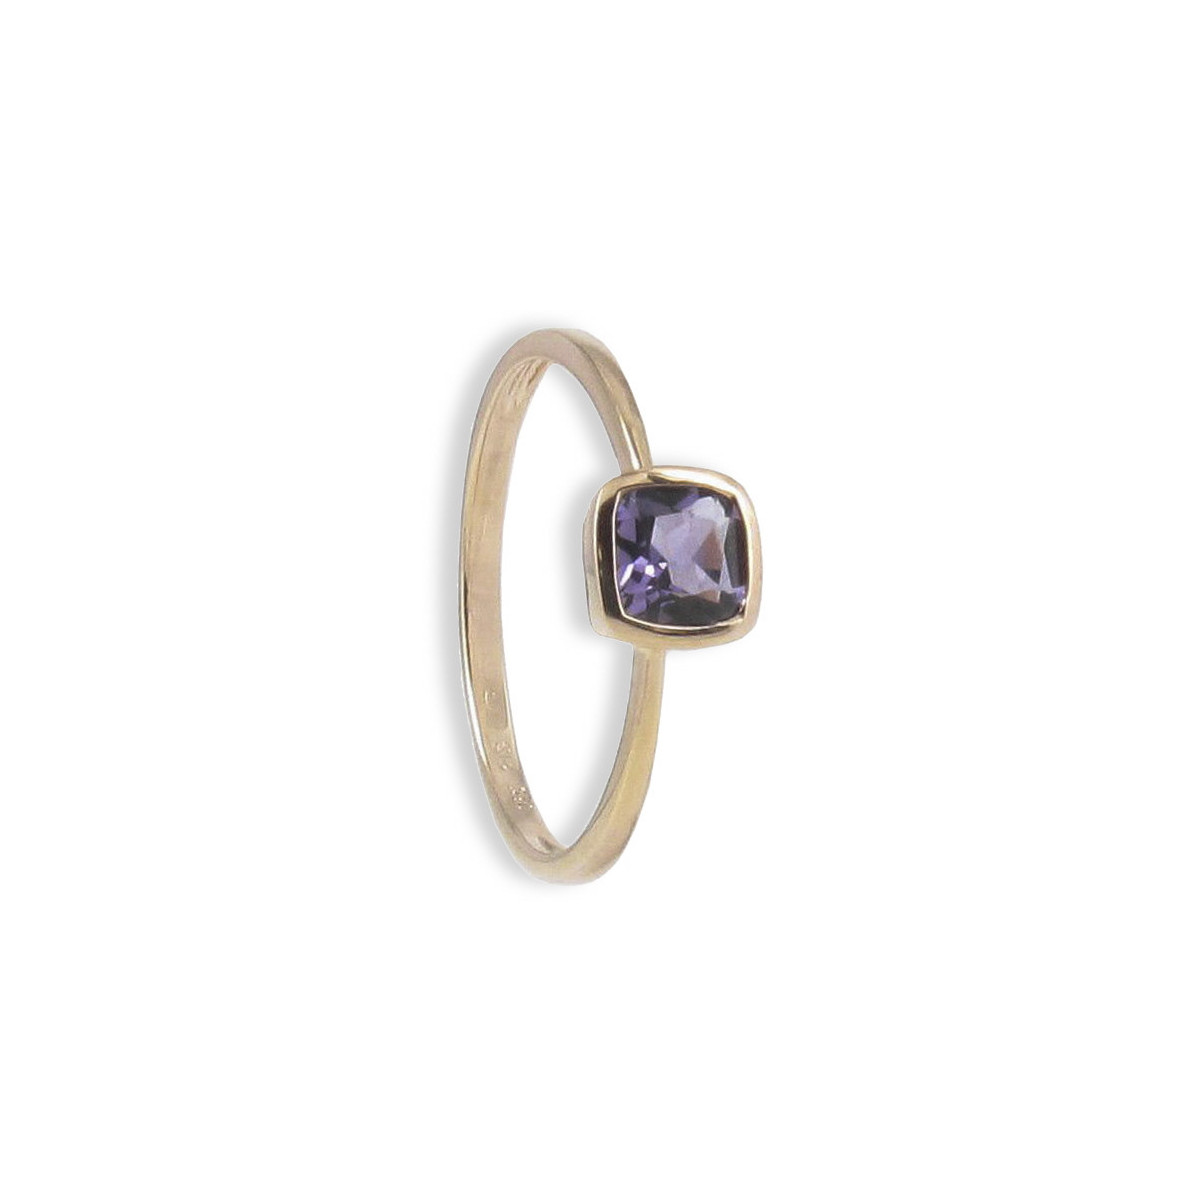 ROSE GOLD RING WITH AMETHYST